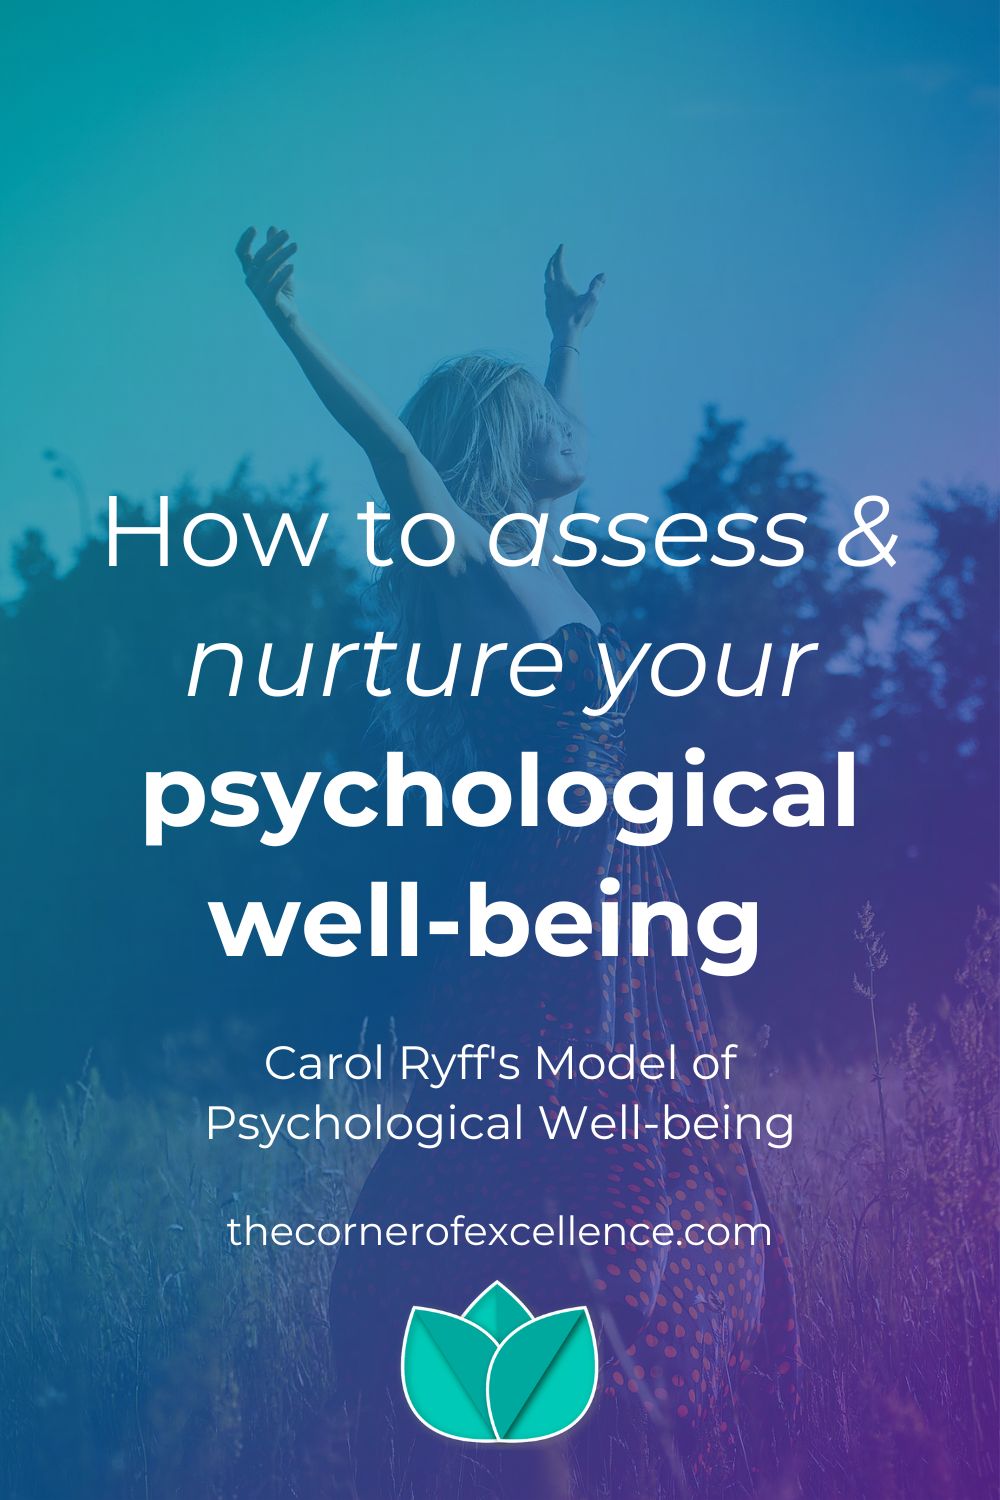 Carol Ryff's model of psychological well-being woman freedom field